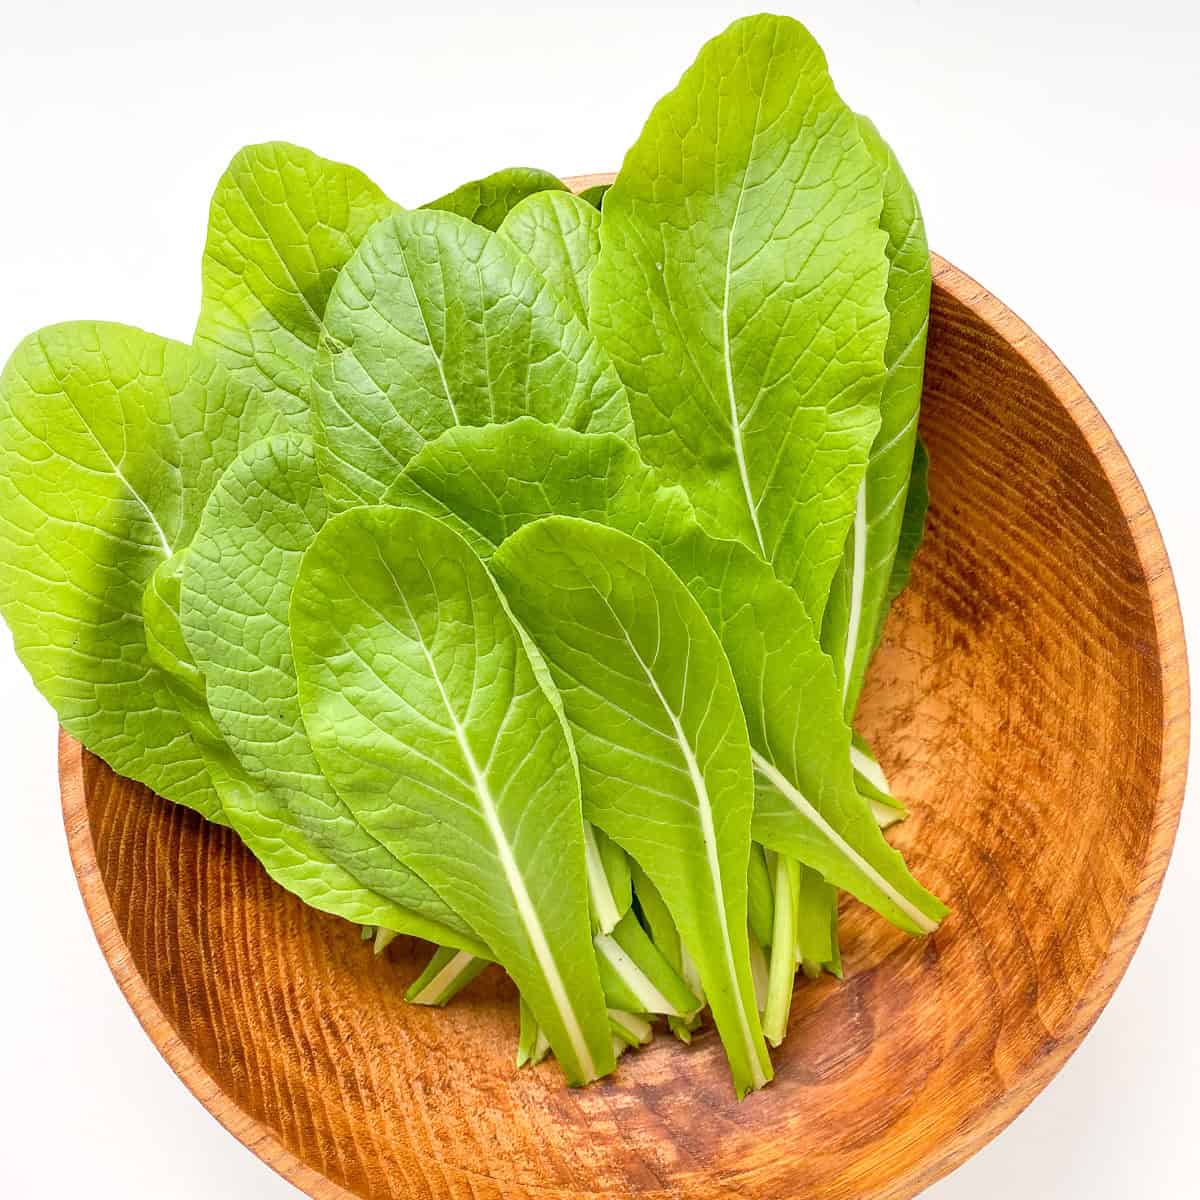 A wooden bowl containing mustard greens.